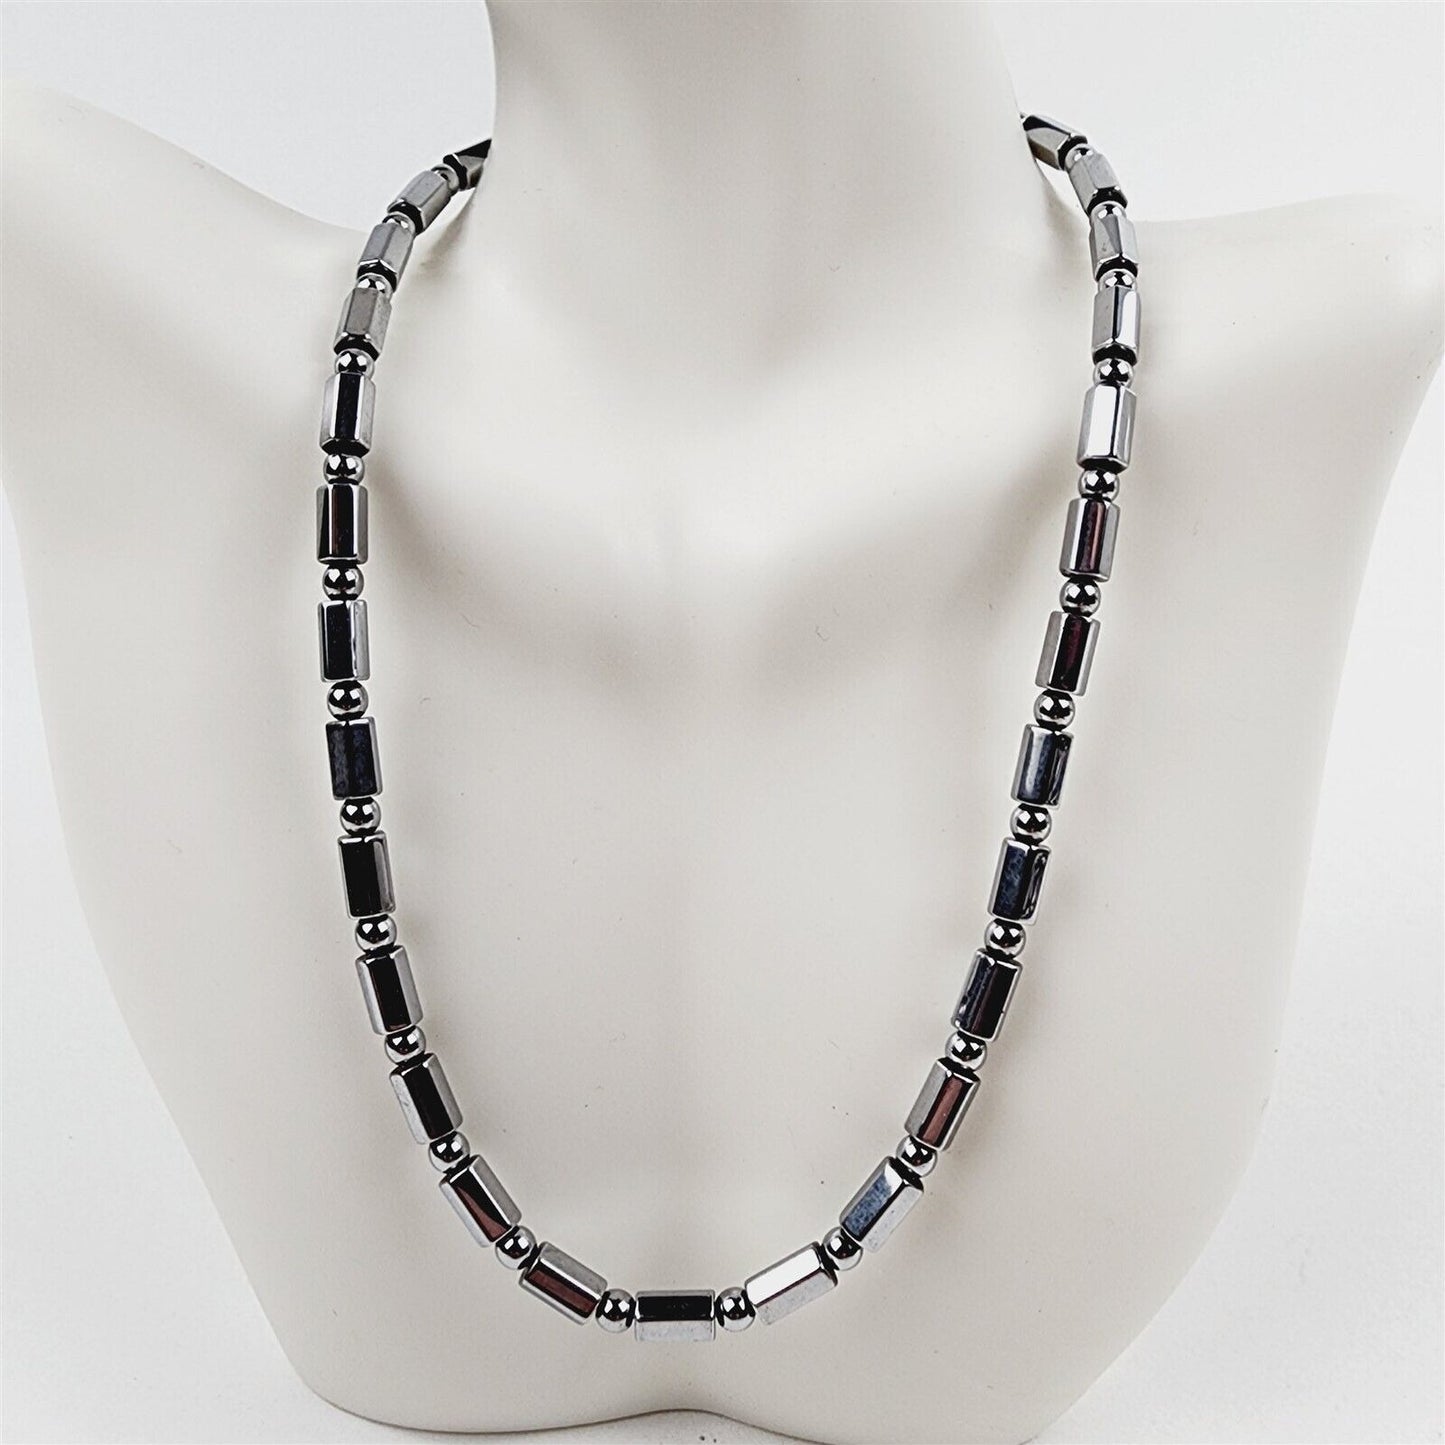 Silver Hex Magnetic Beaded Necklace Therapeutic Handmade